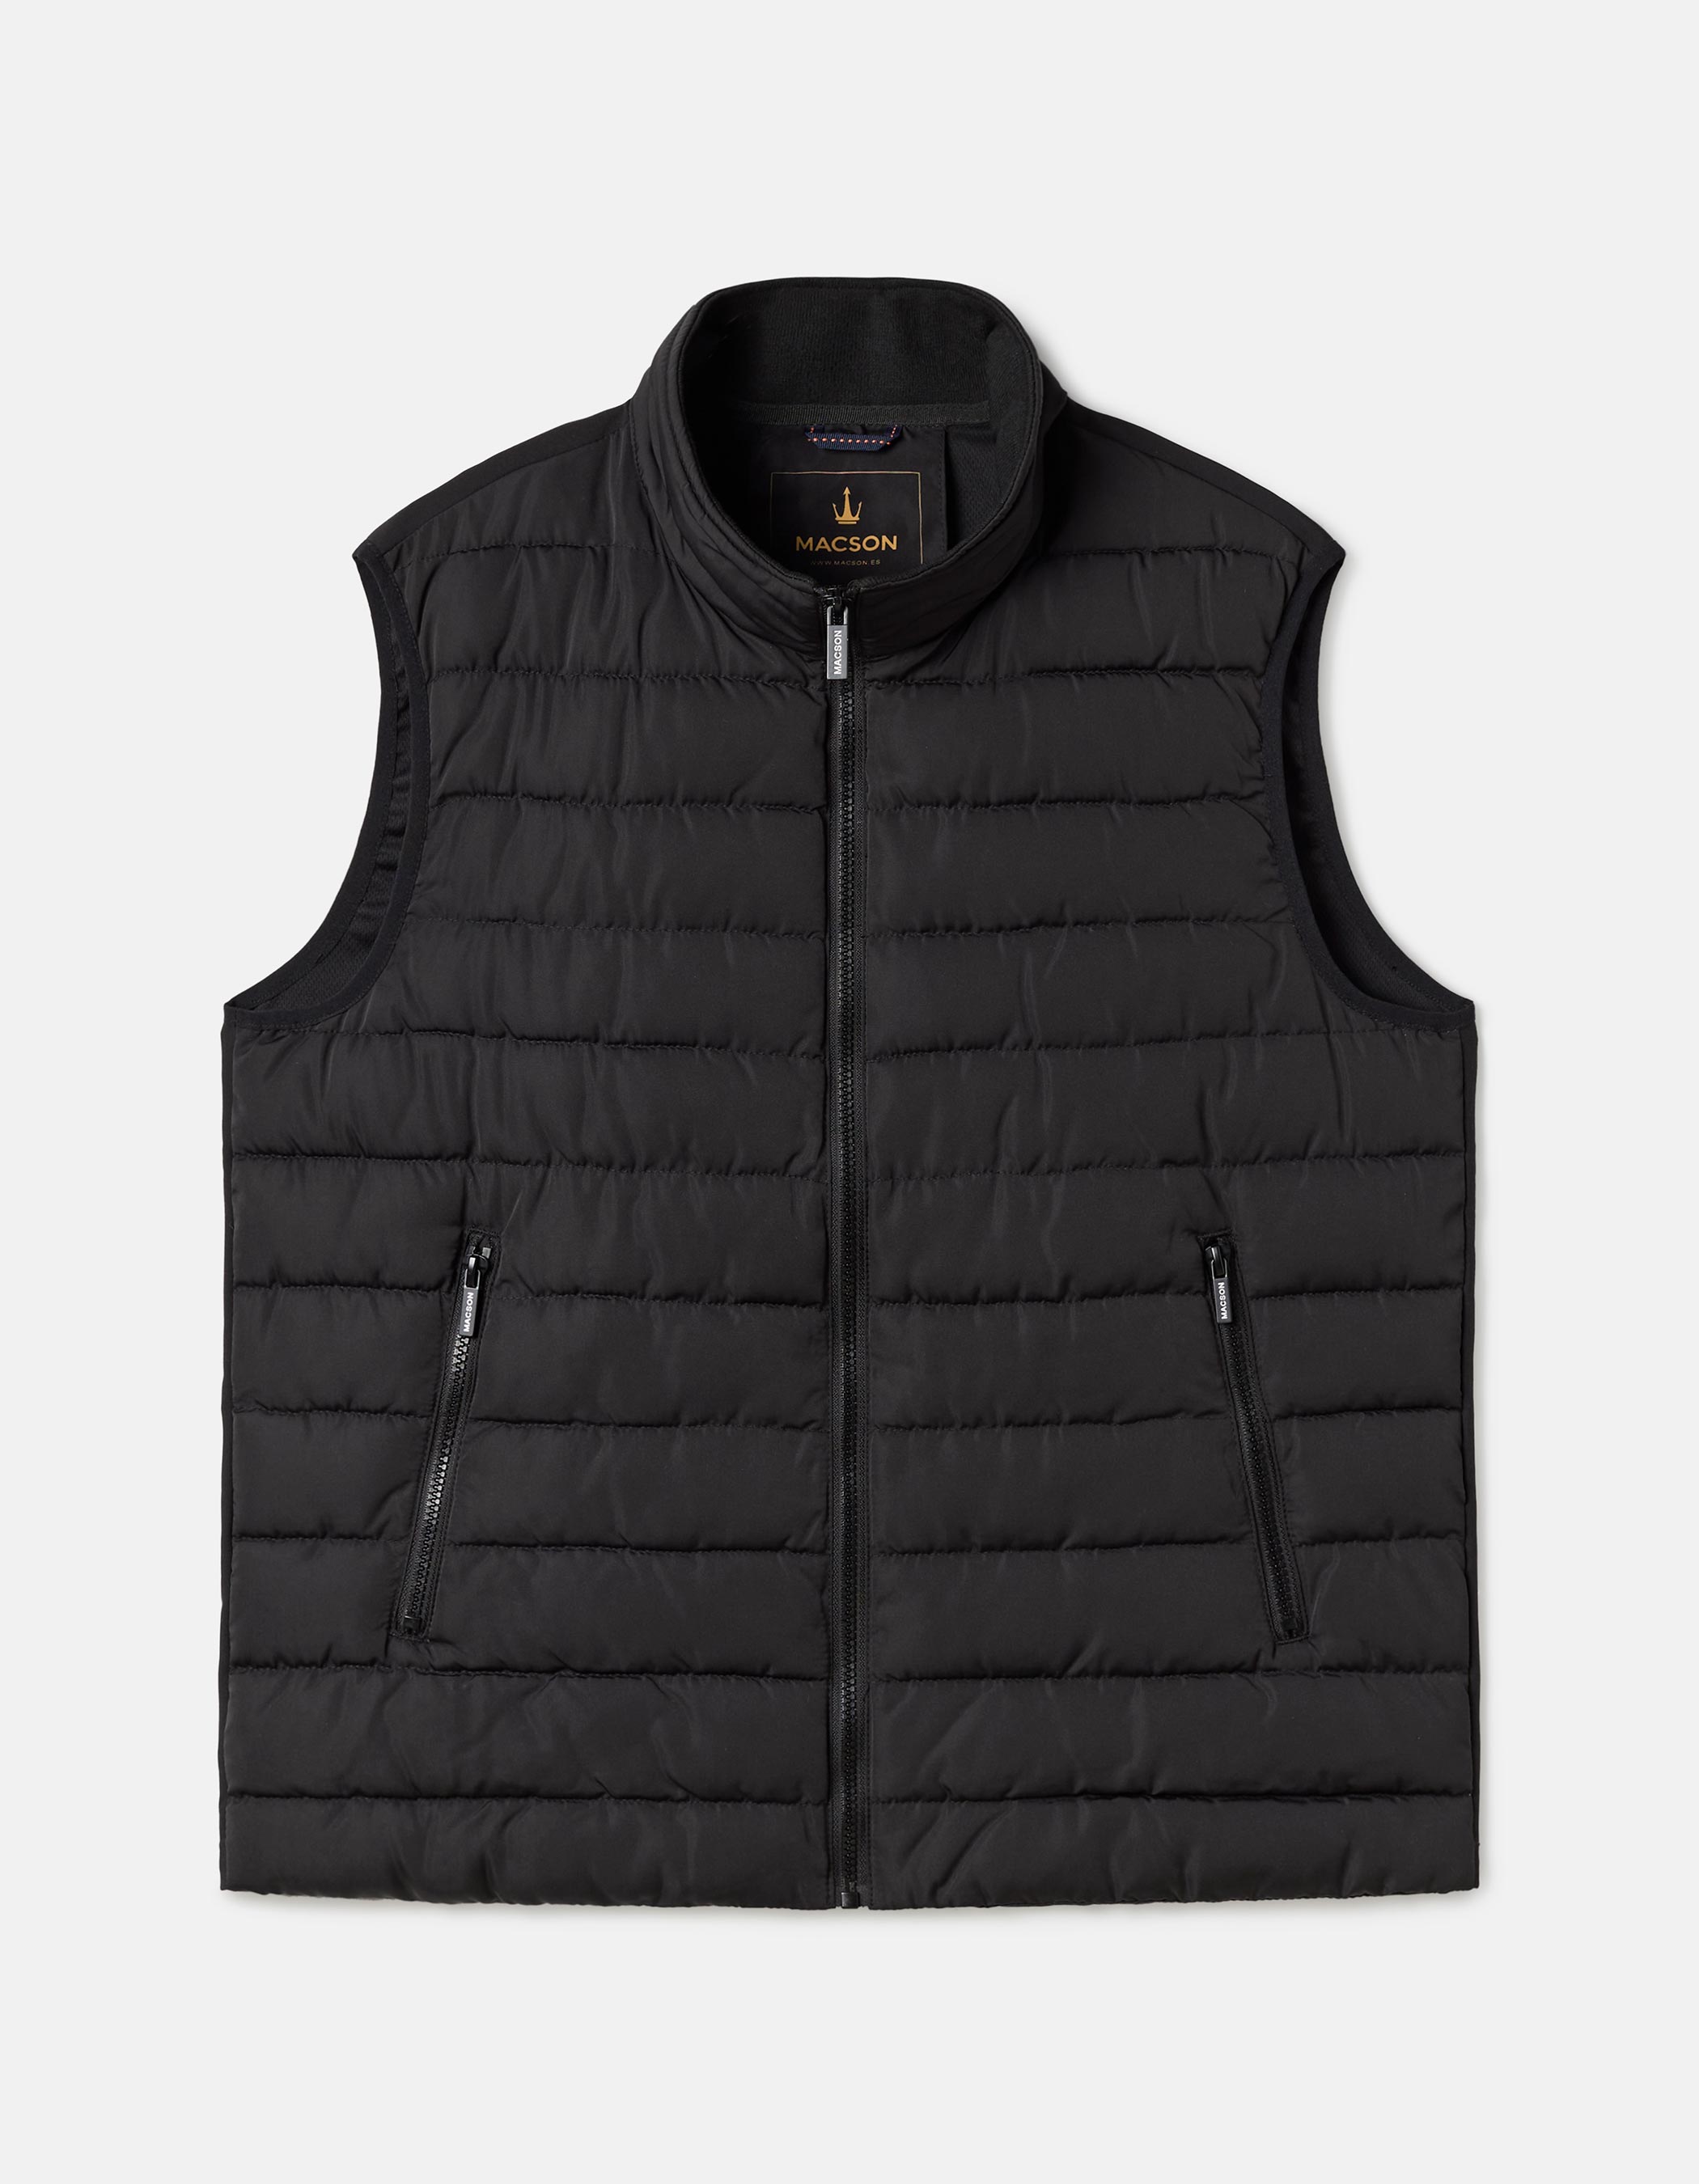 Half quilted waistcoat